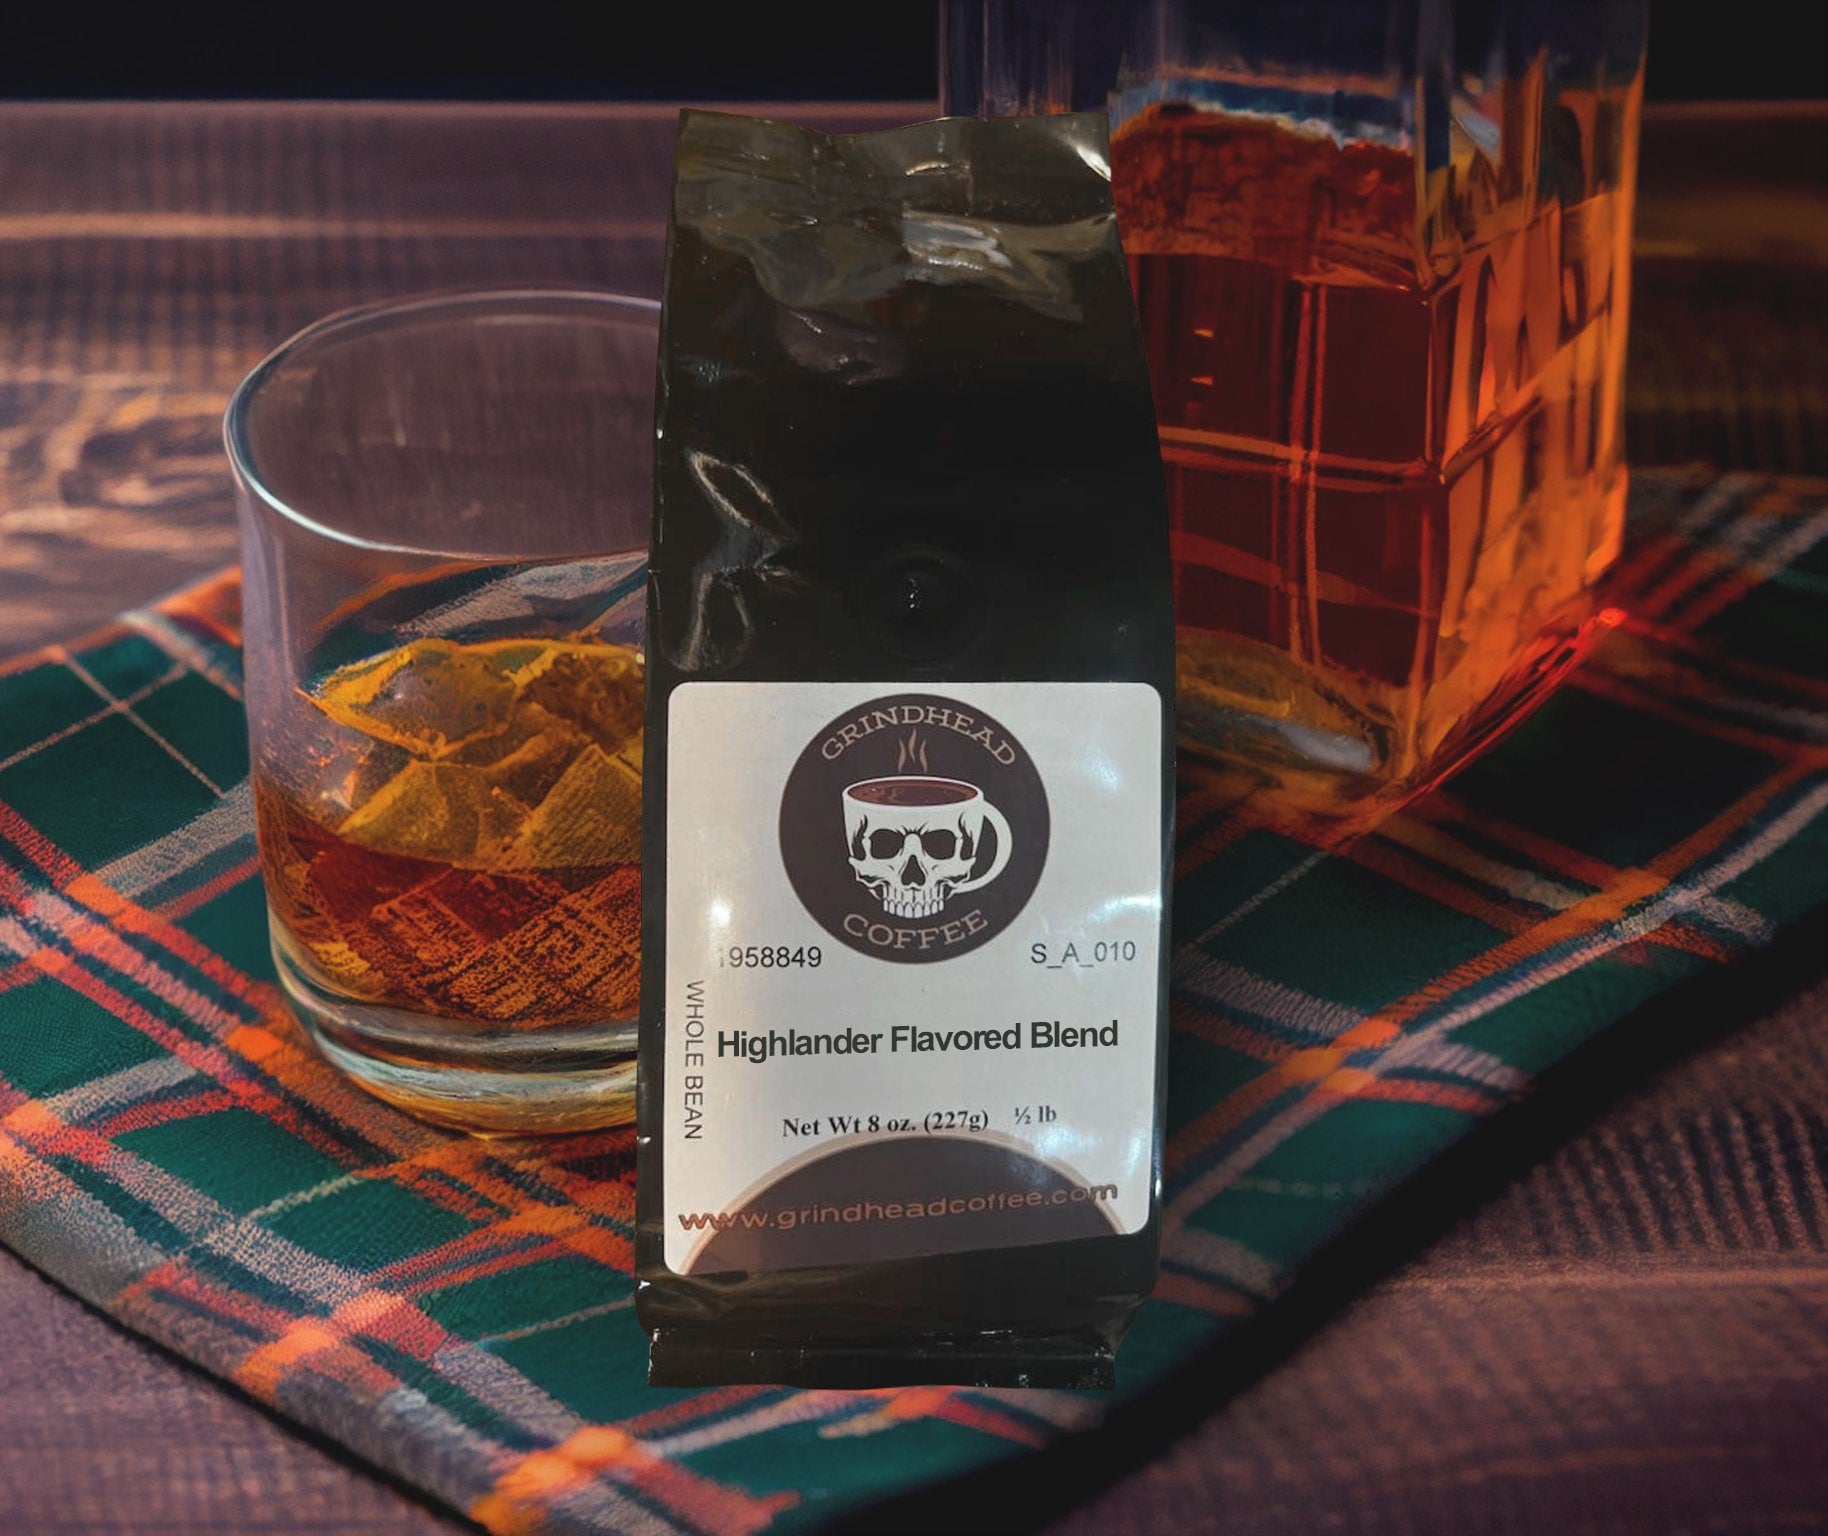 Scottish Coffee - Highlander Grogg - Flavored Blend of Brandy and Spice - Coffee Lover Gift